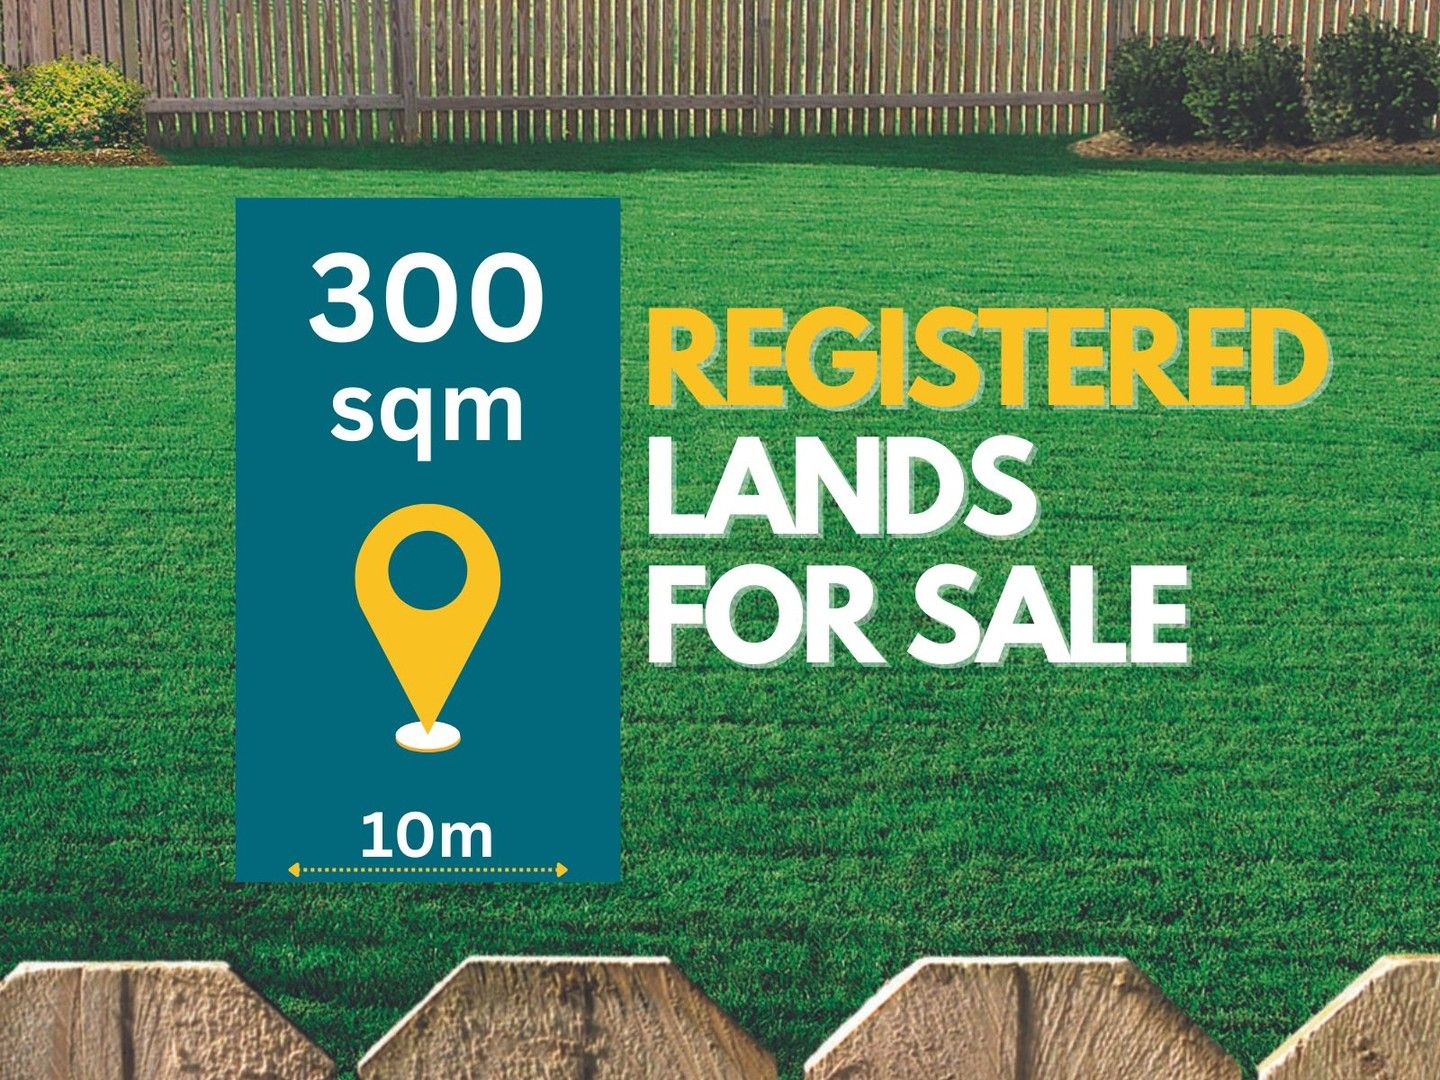 Vacant land in 300sqm Land for Sale, ORANGE NSW, 2800